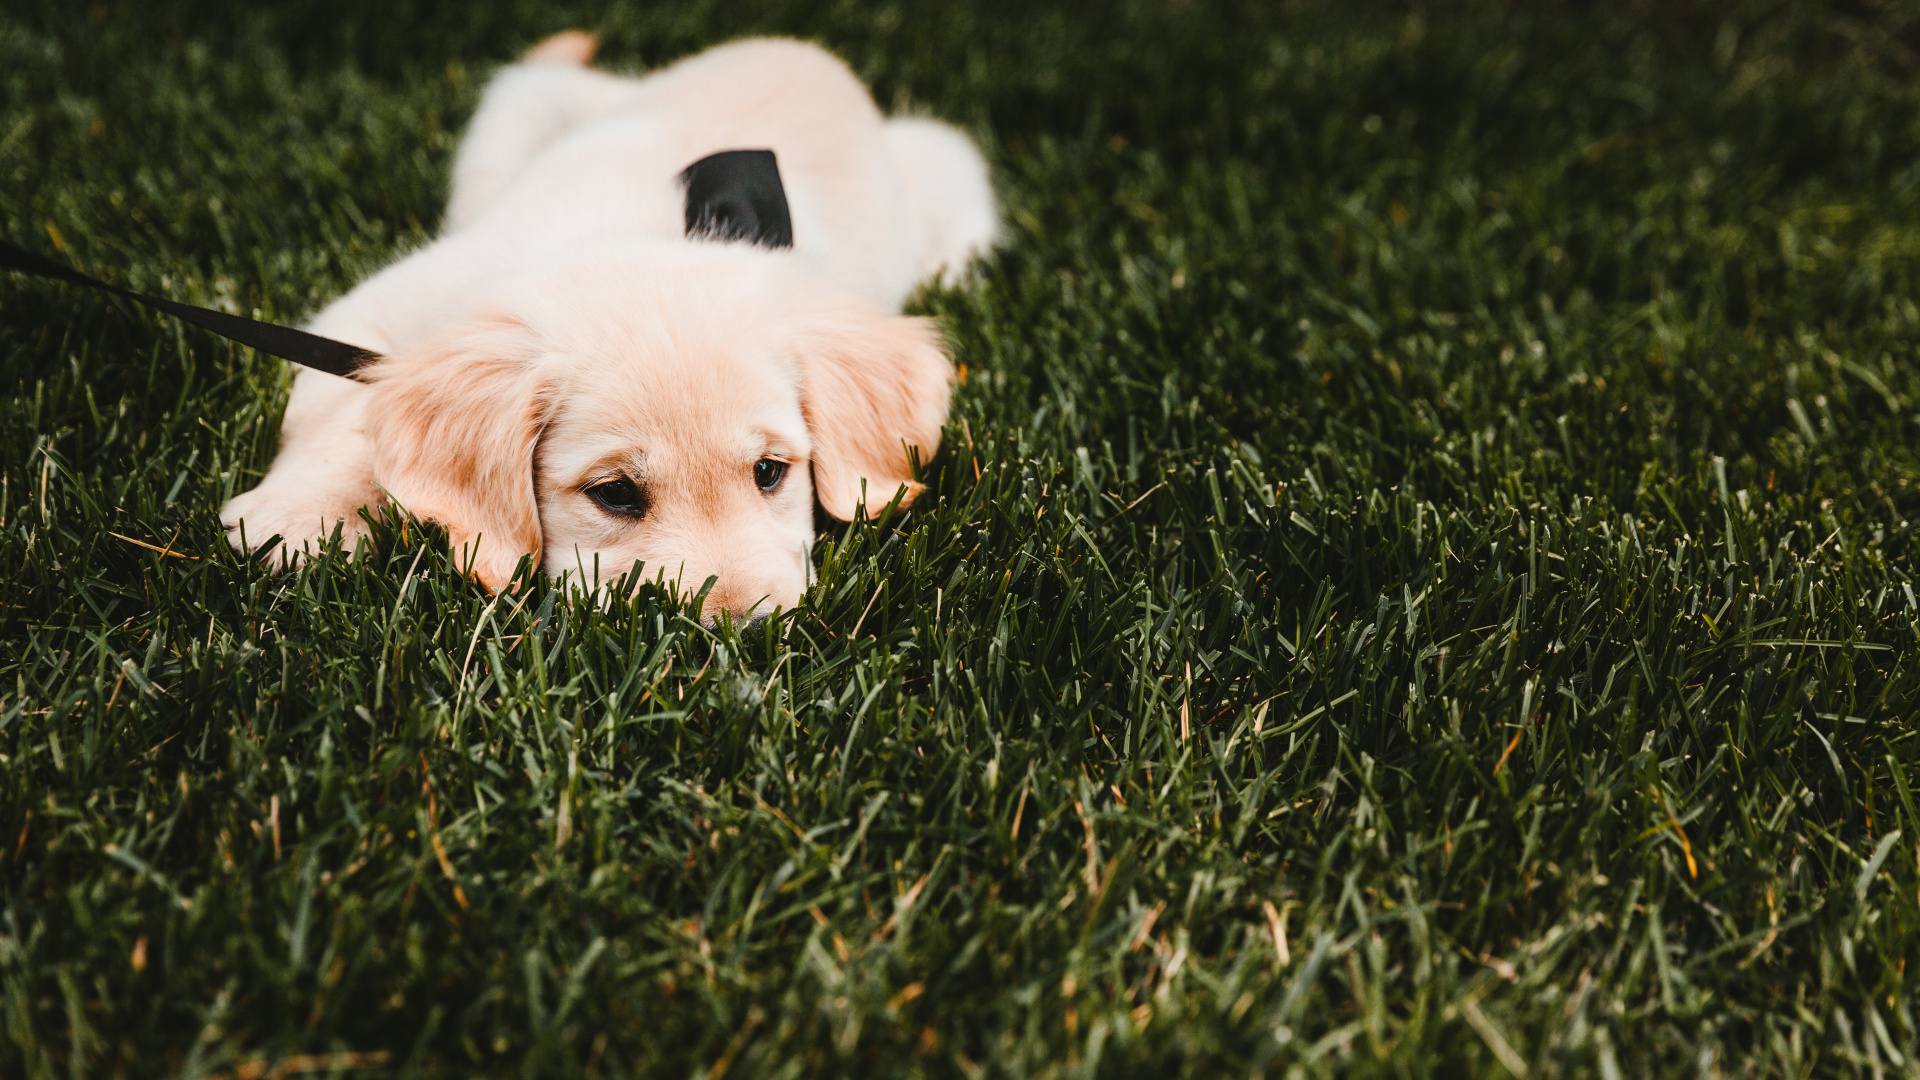 White Short Coated Dog Lying on Green Grass Field During Daytime. Wallpaper in 1920x1080 Resolution